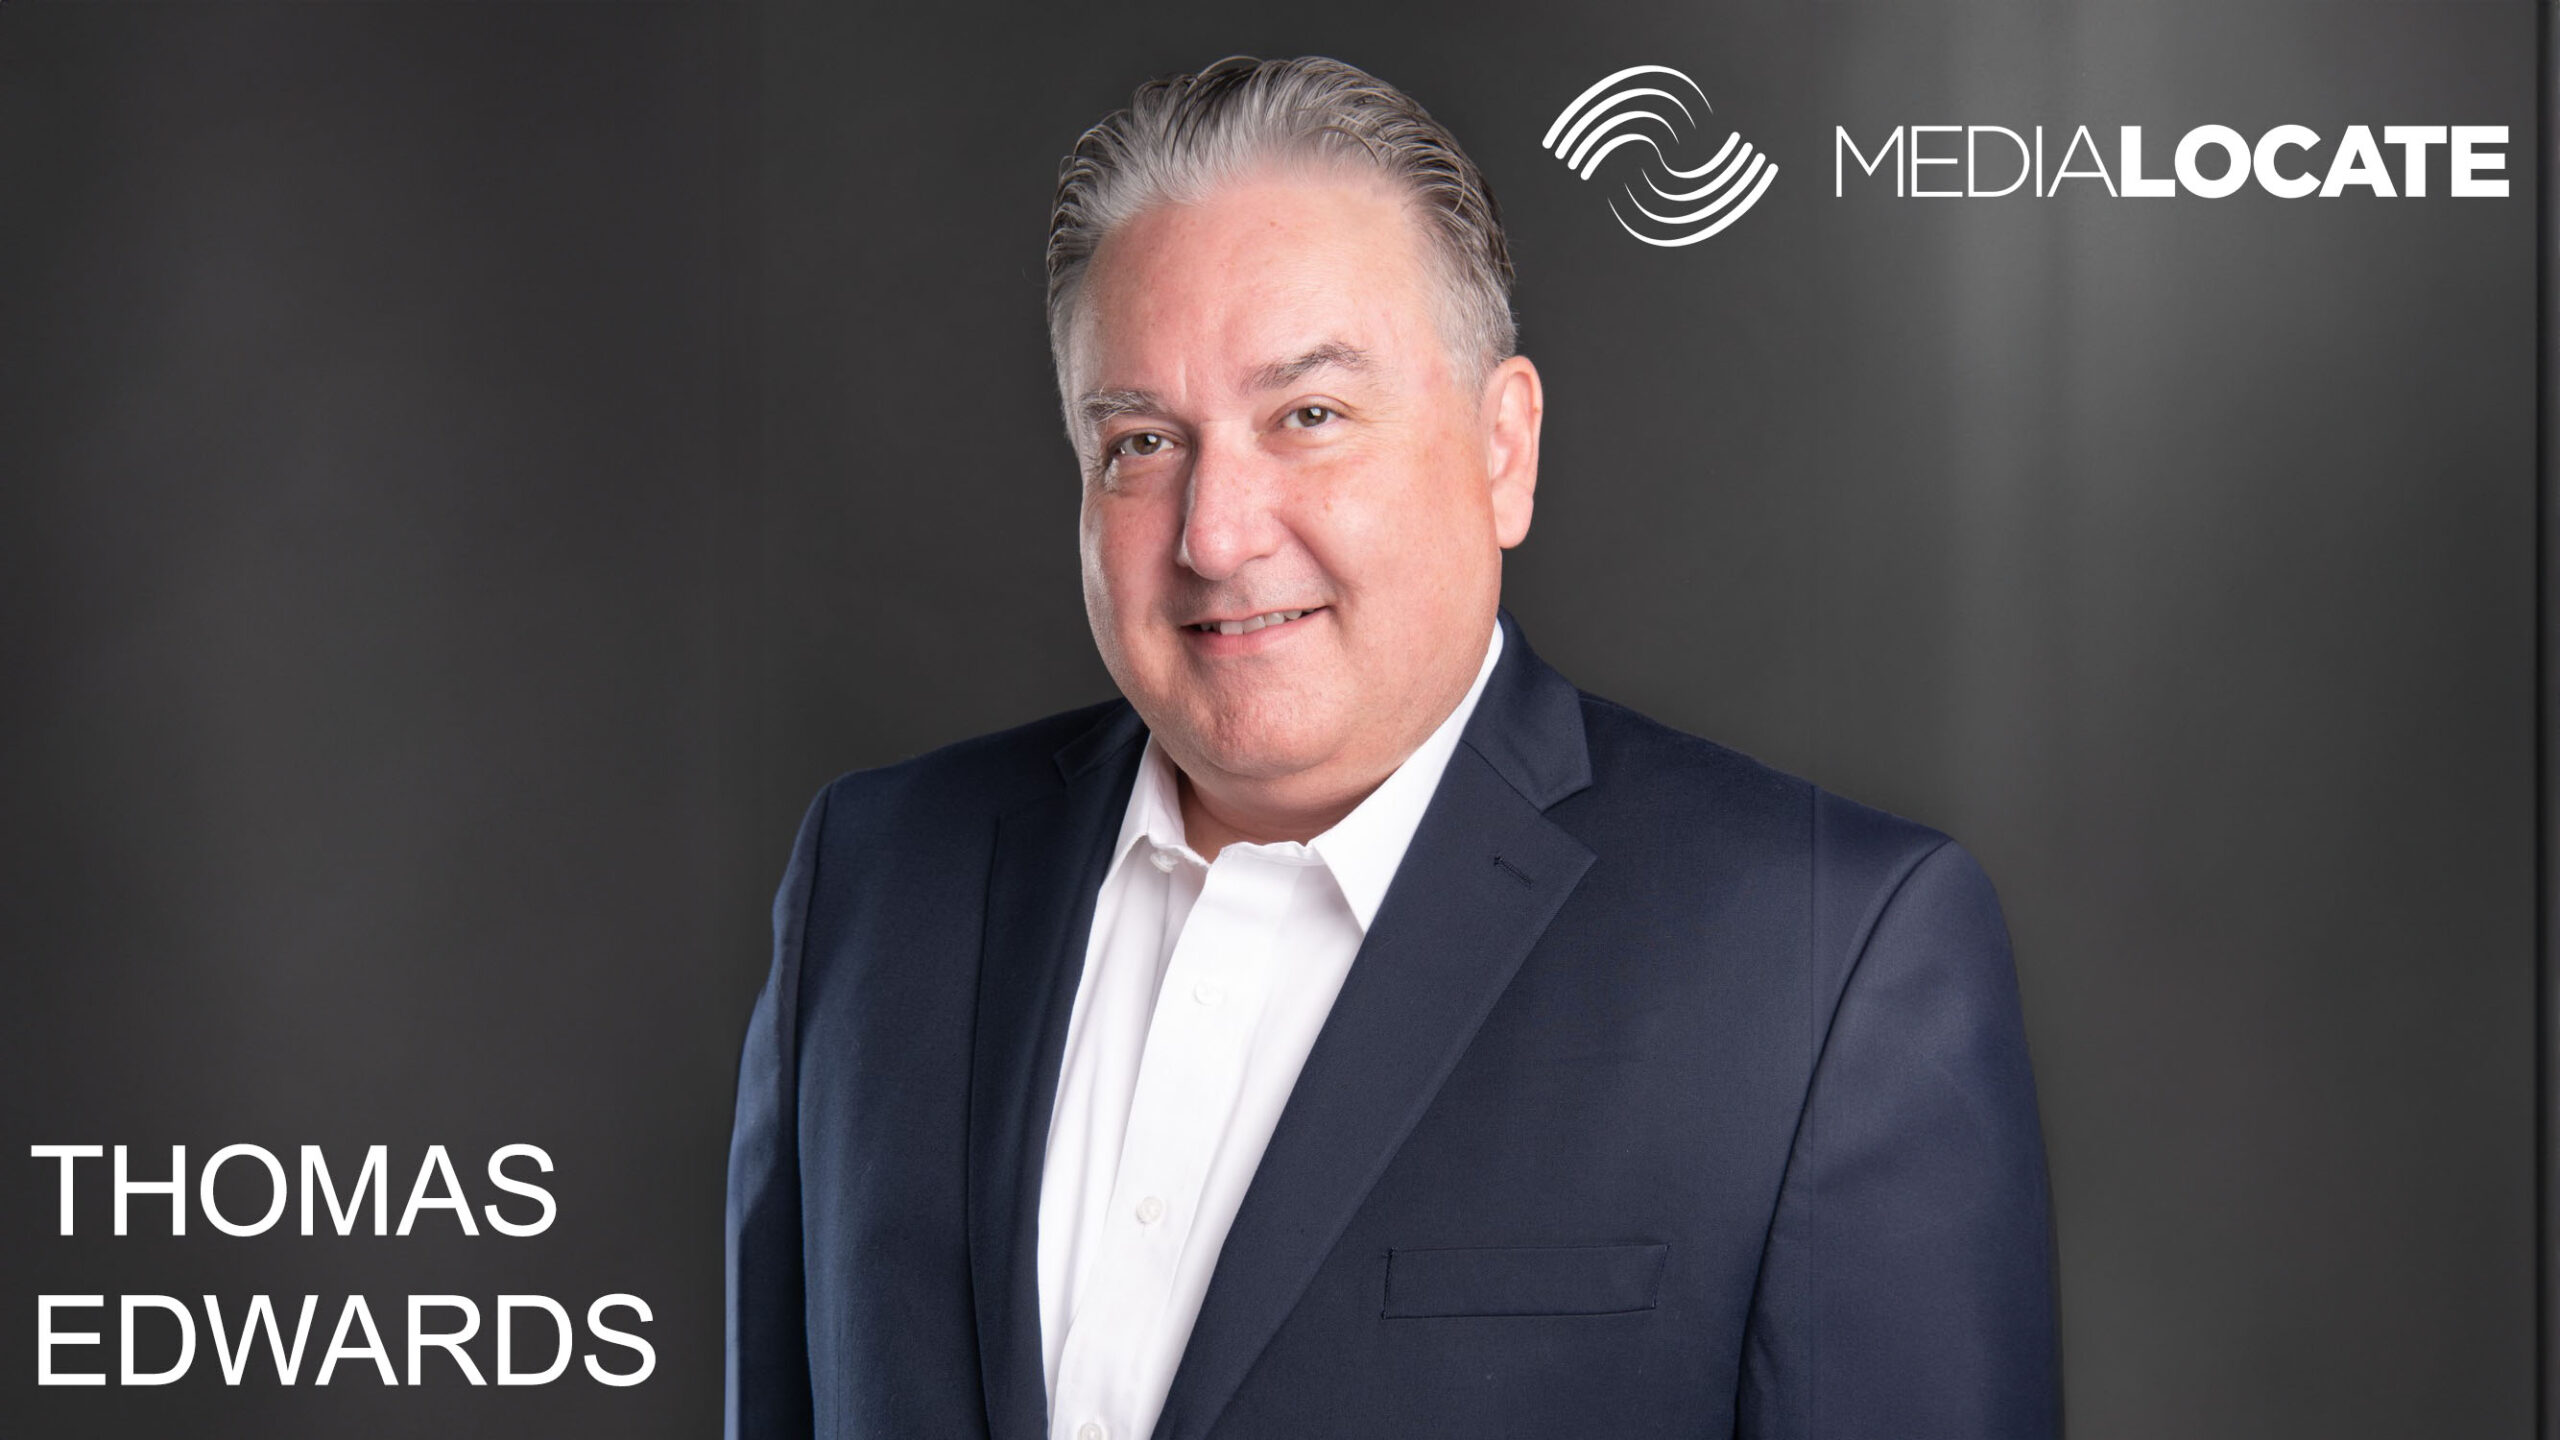 Thomas Edwards joins MediaLocate as Head of Strategic Account Management and Language Services